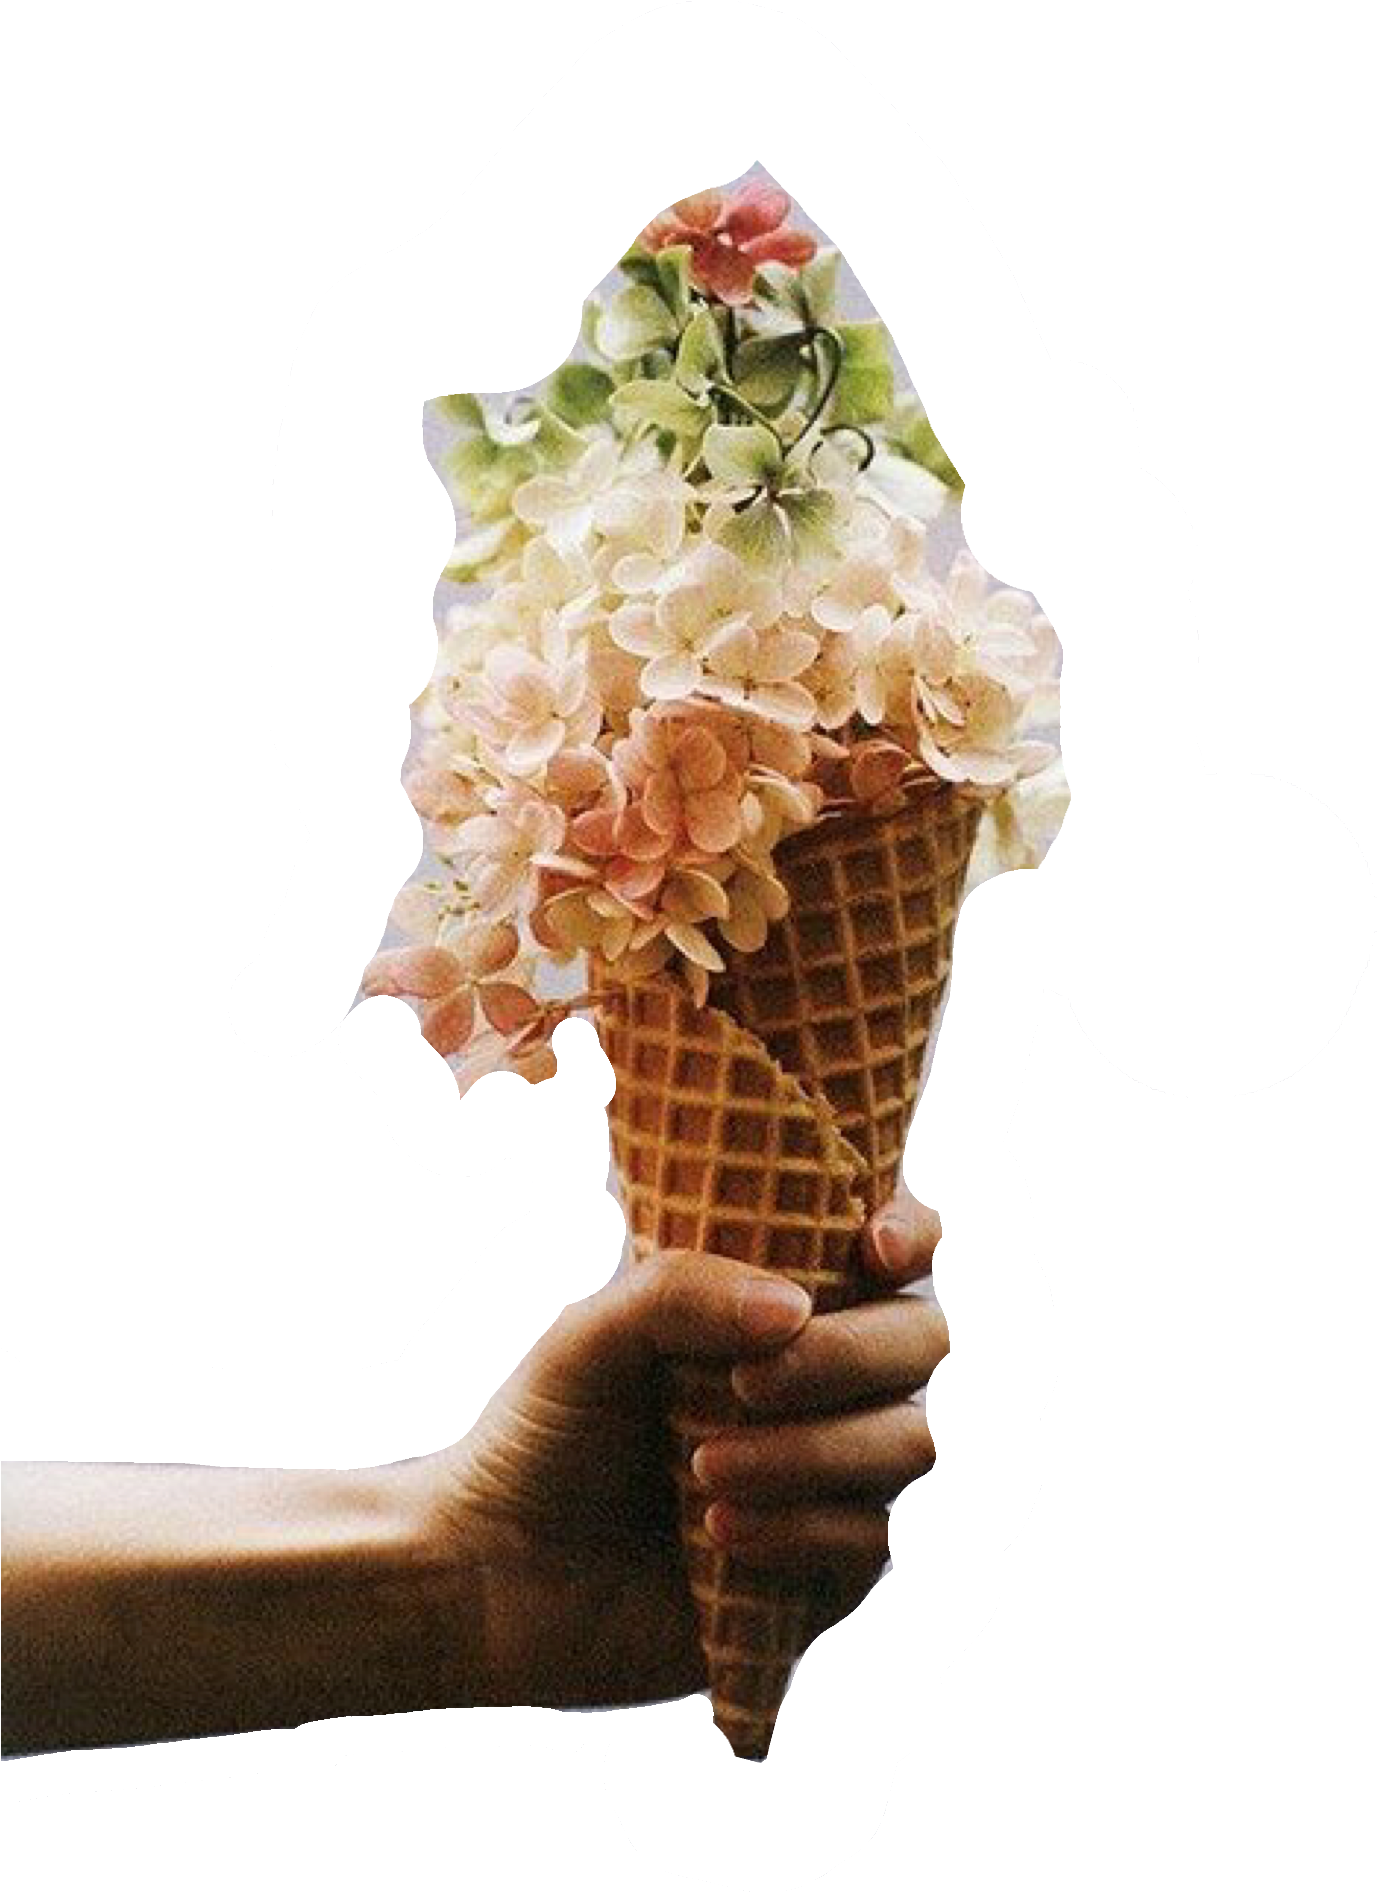 A Hand Holding A Flower In A Cone